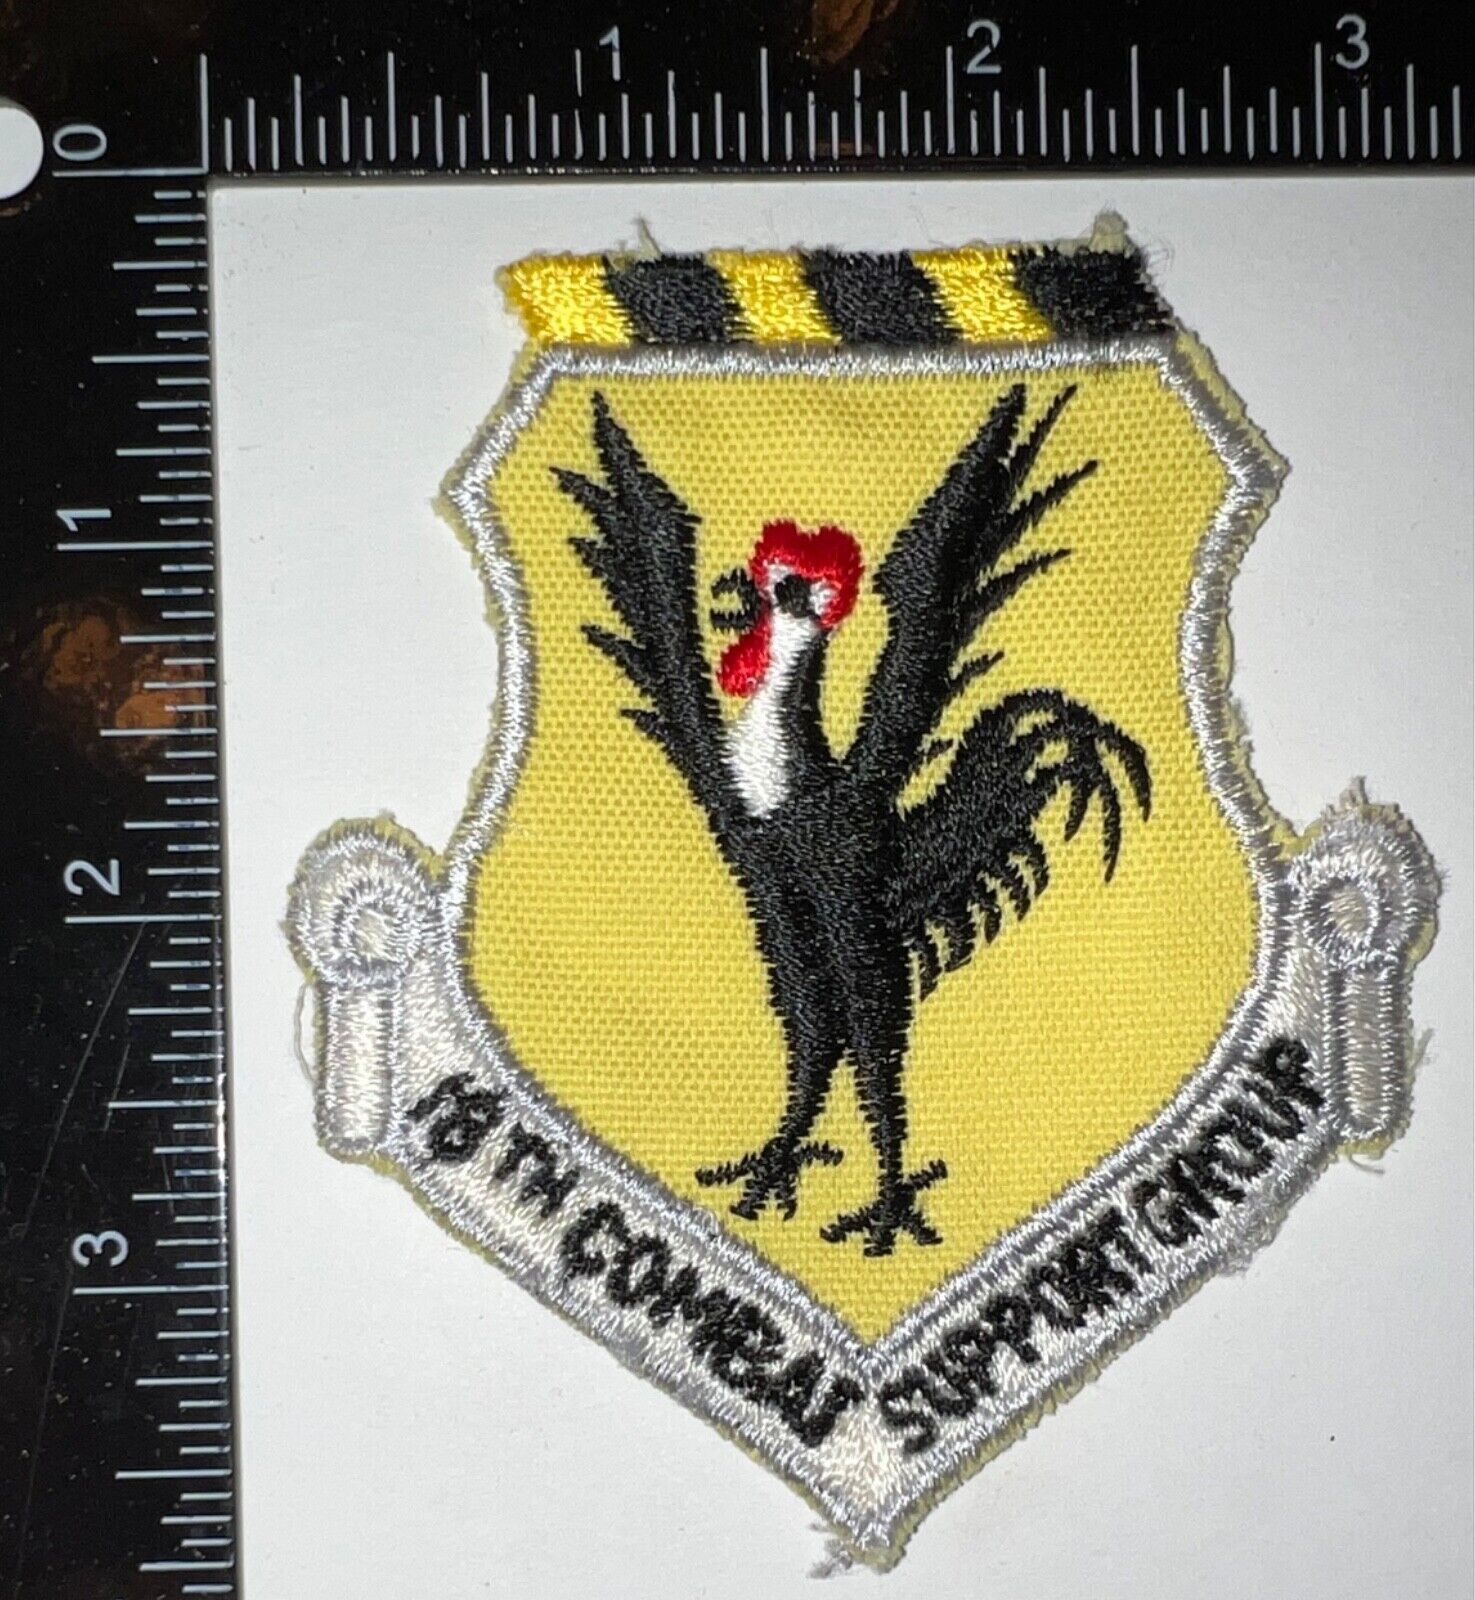 USAF US Air Force 18th Combat Support Group Patch